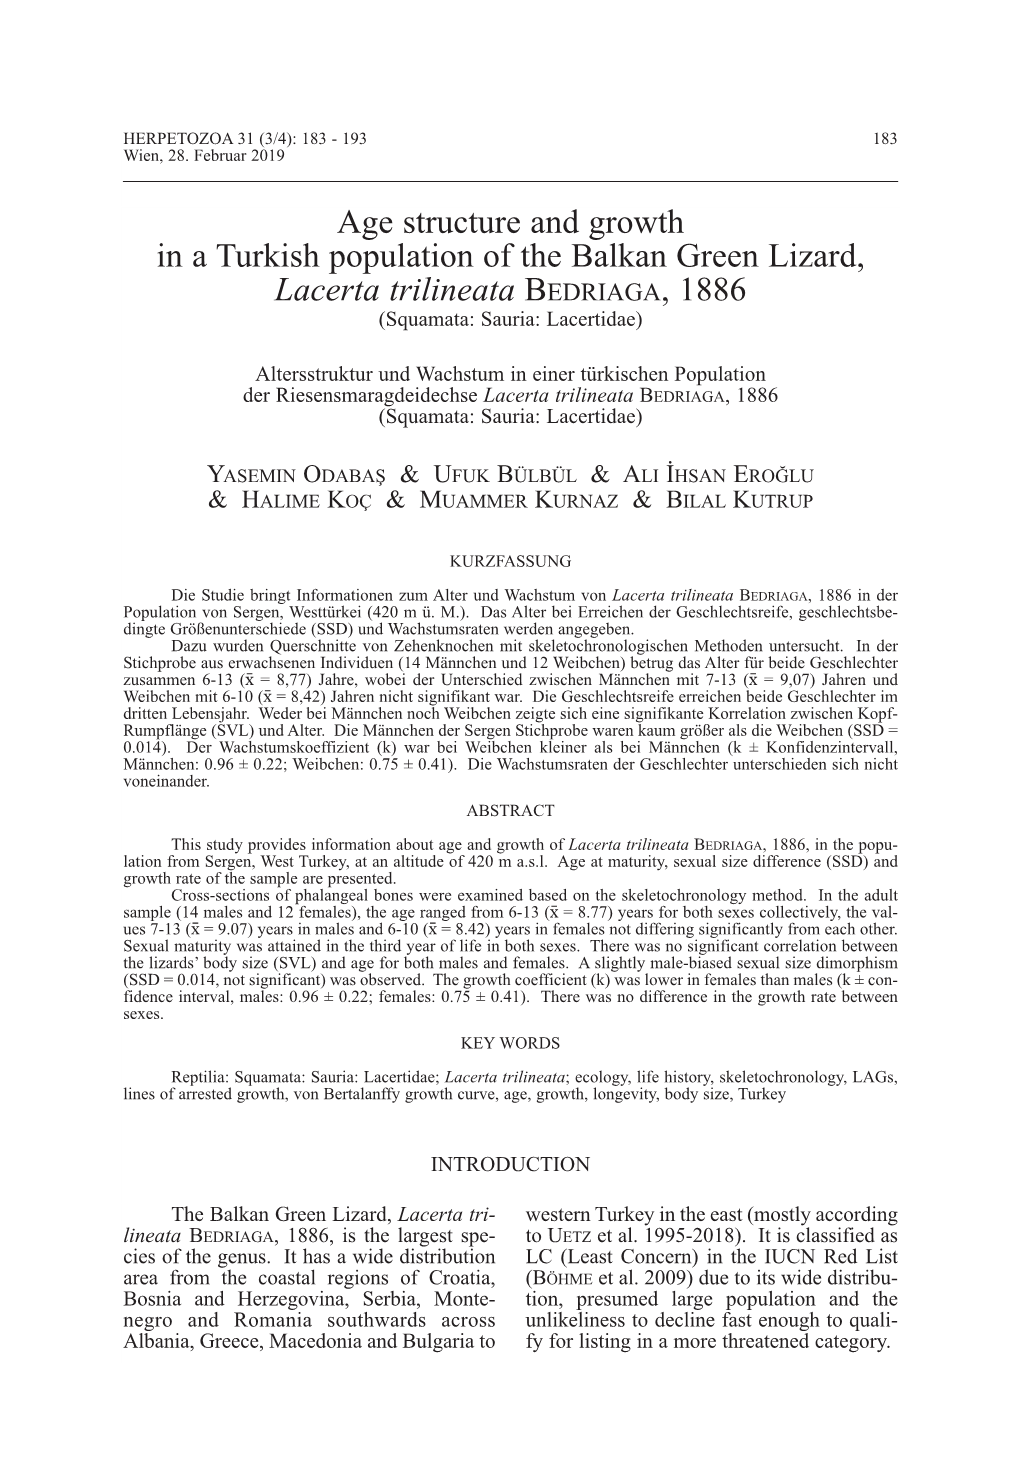 Age Structure and Growth in a Turkish Population of the Balkan Green Lizard, Lacerta Trilineata Bedriaga , 1886 (Squamata: Sauria: Lacertidae)